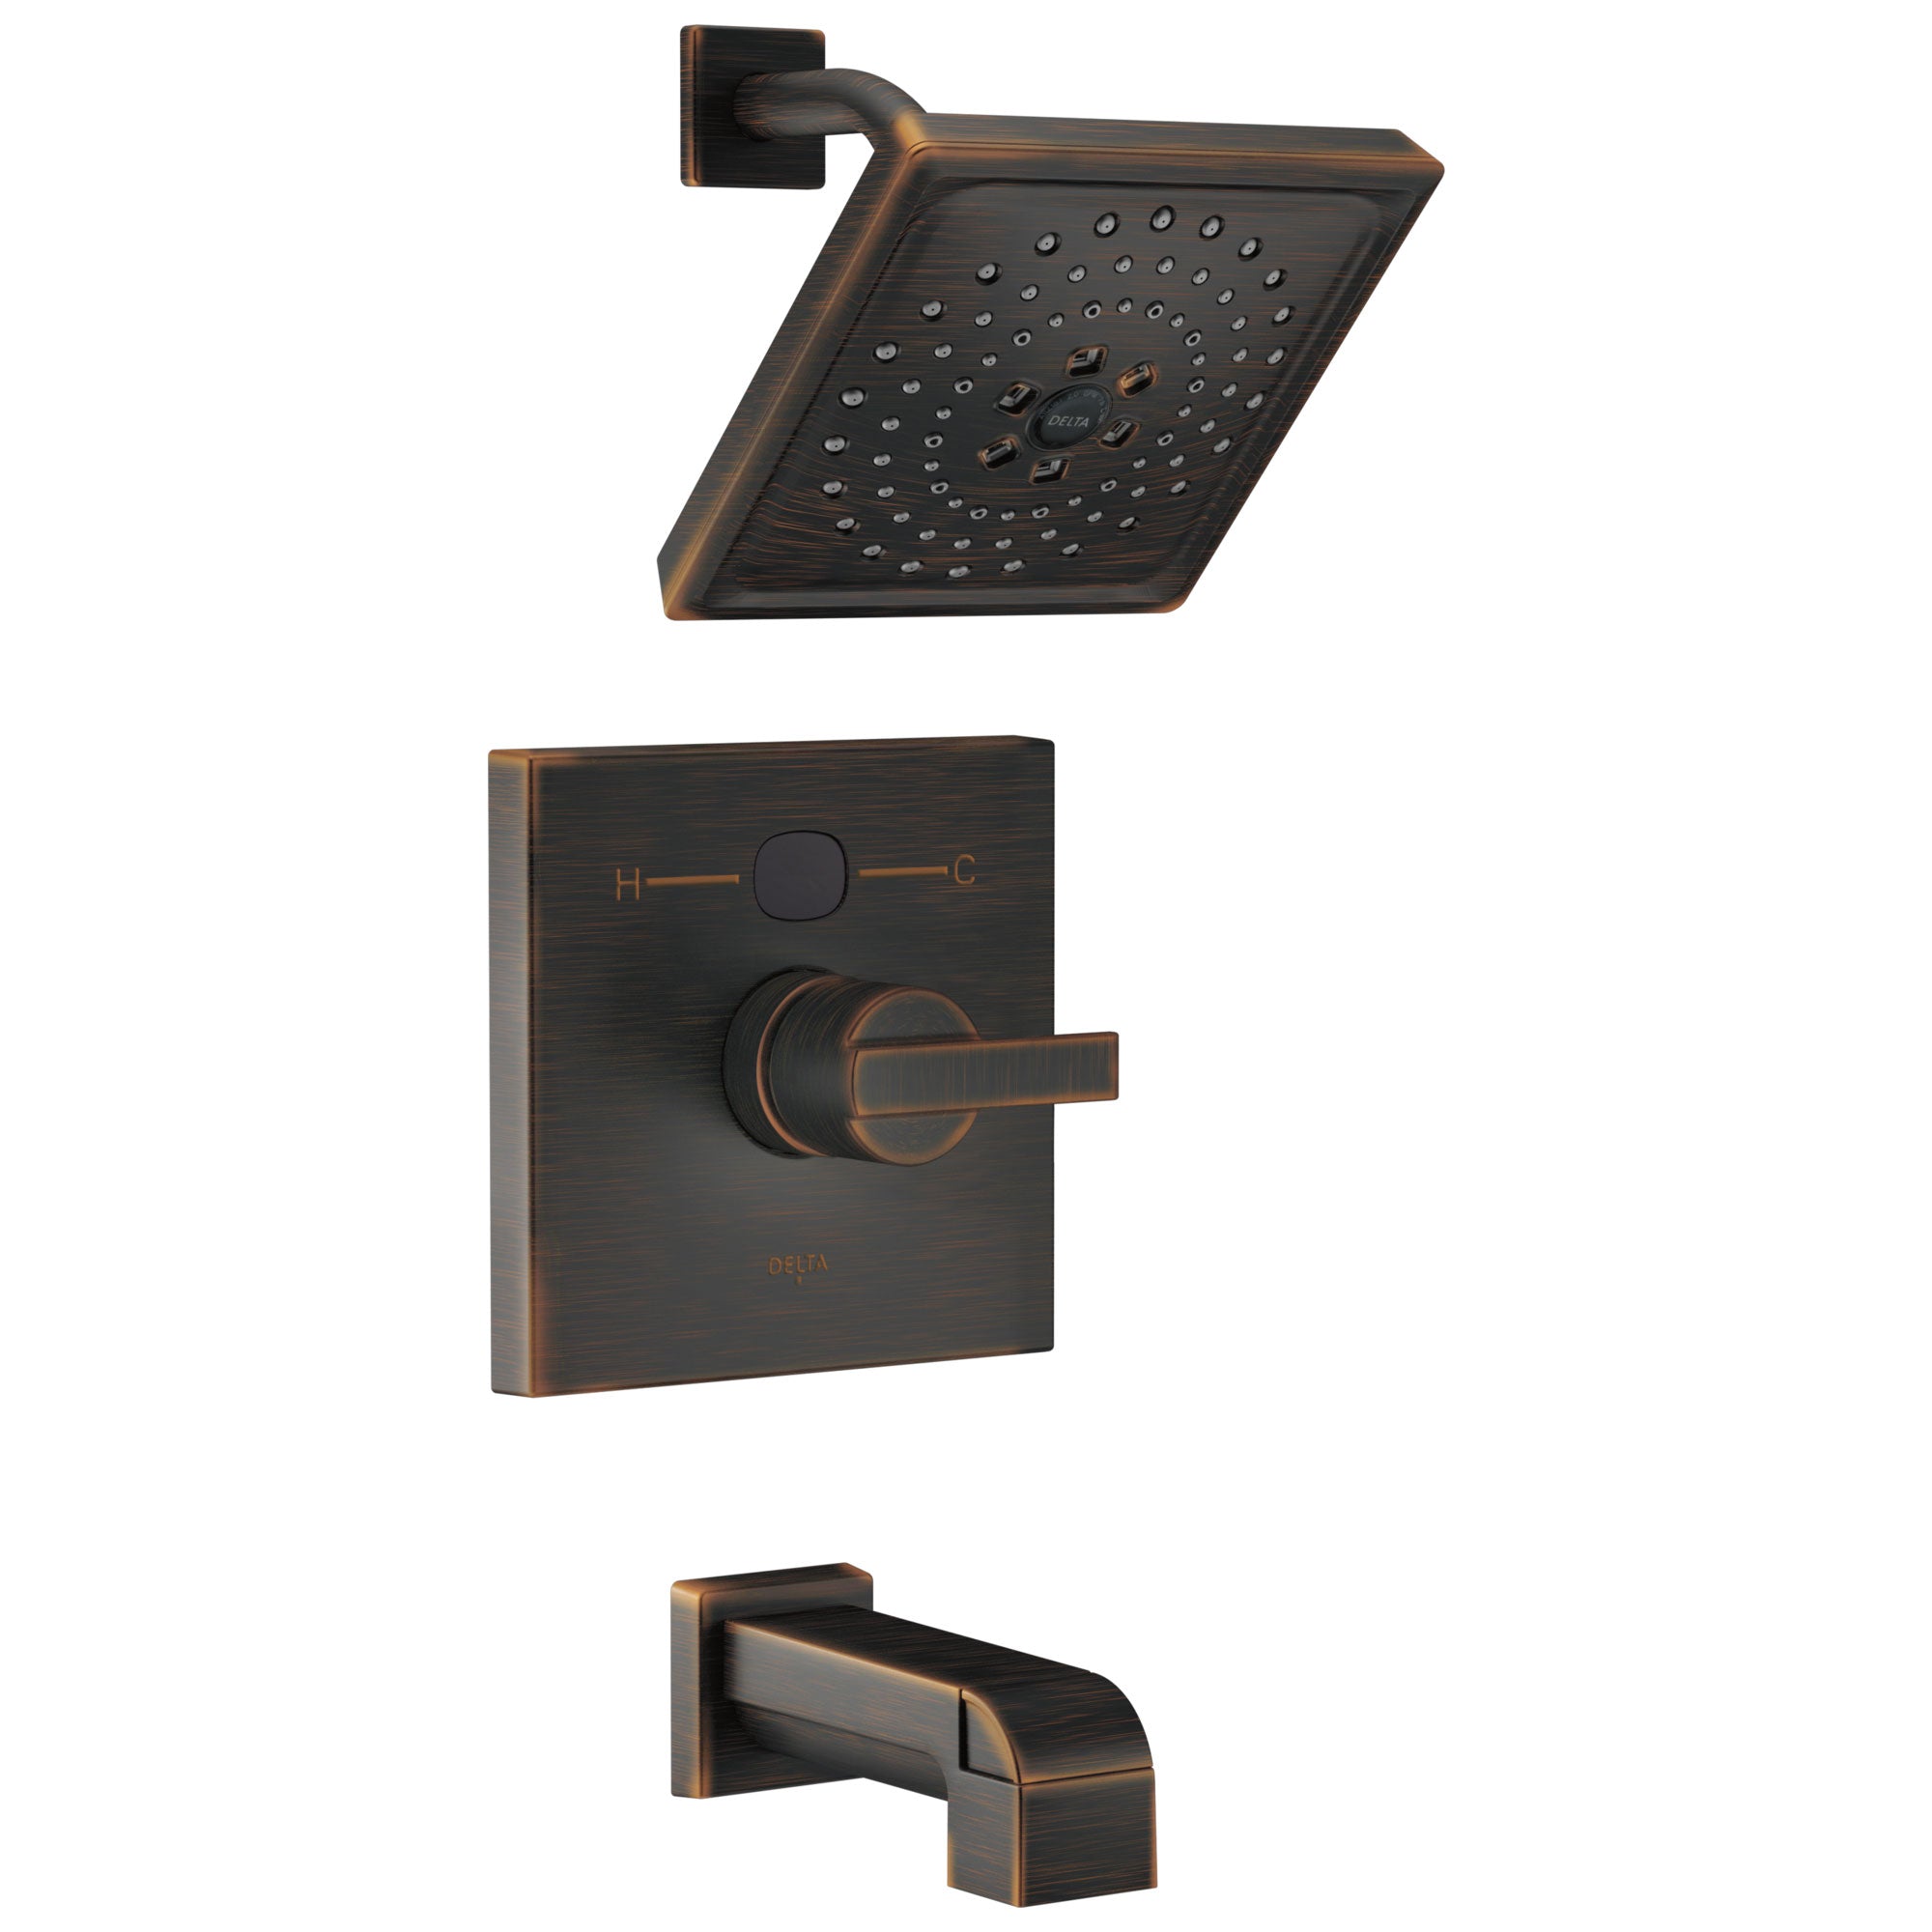 Delta Venetian Bronze Ara Angular Modern 14 Series Digital Display Temp2O One Handle Tub and Shower Combination Faucet Includes Valve without Stops D2010V